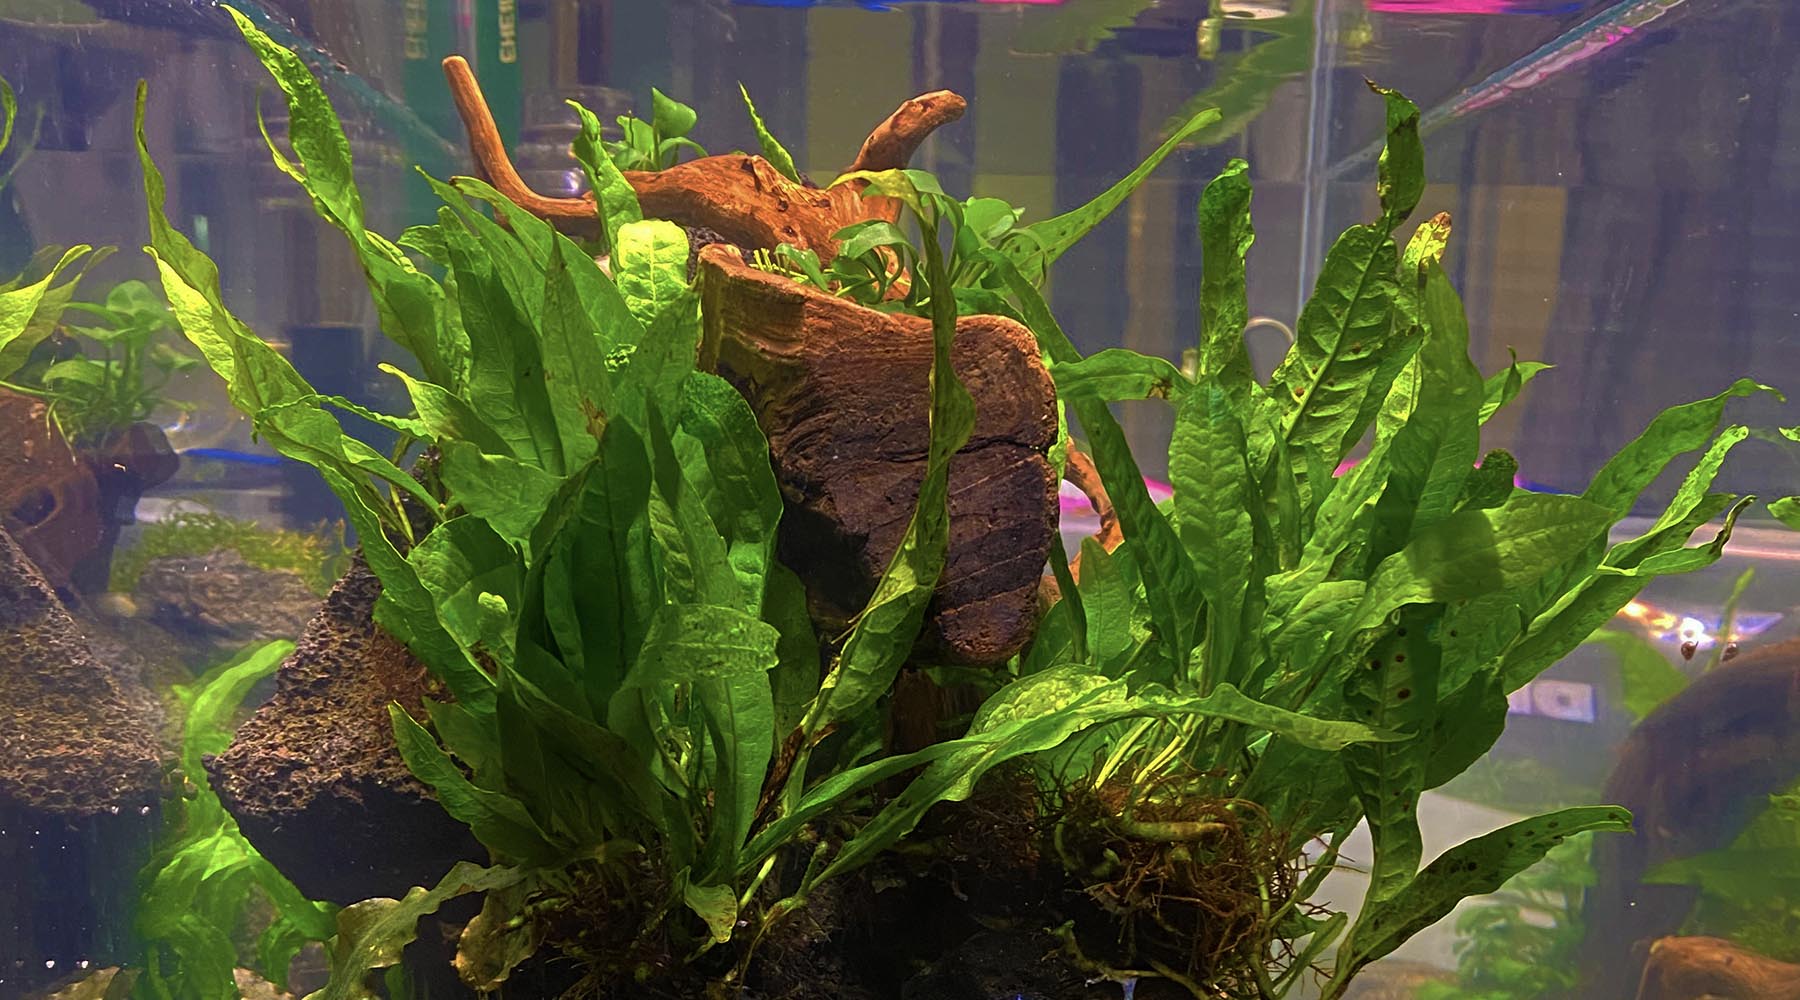 Top 5 Aquarium plants that grow well with no soil